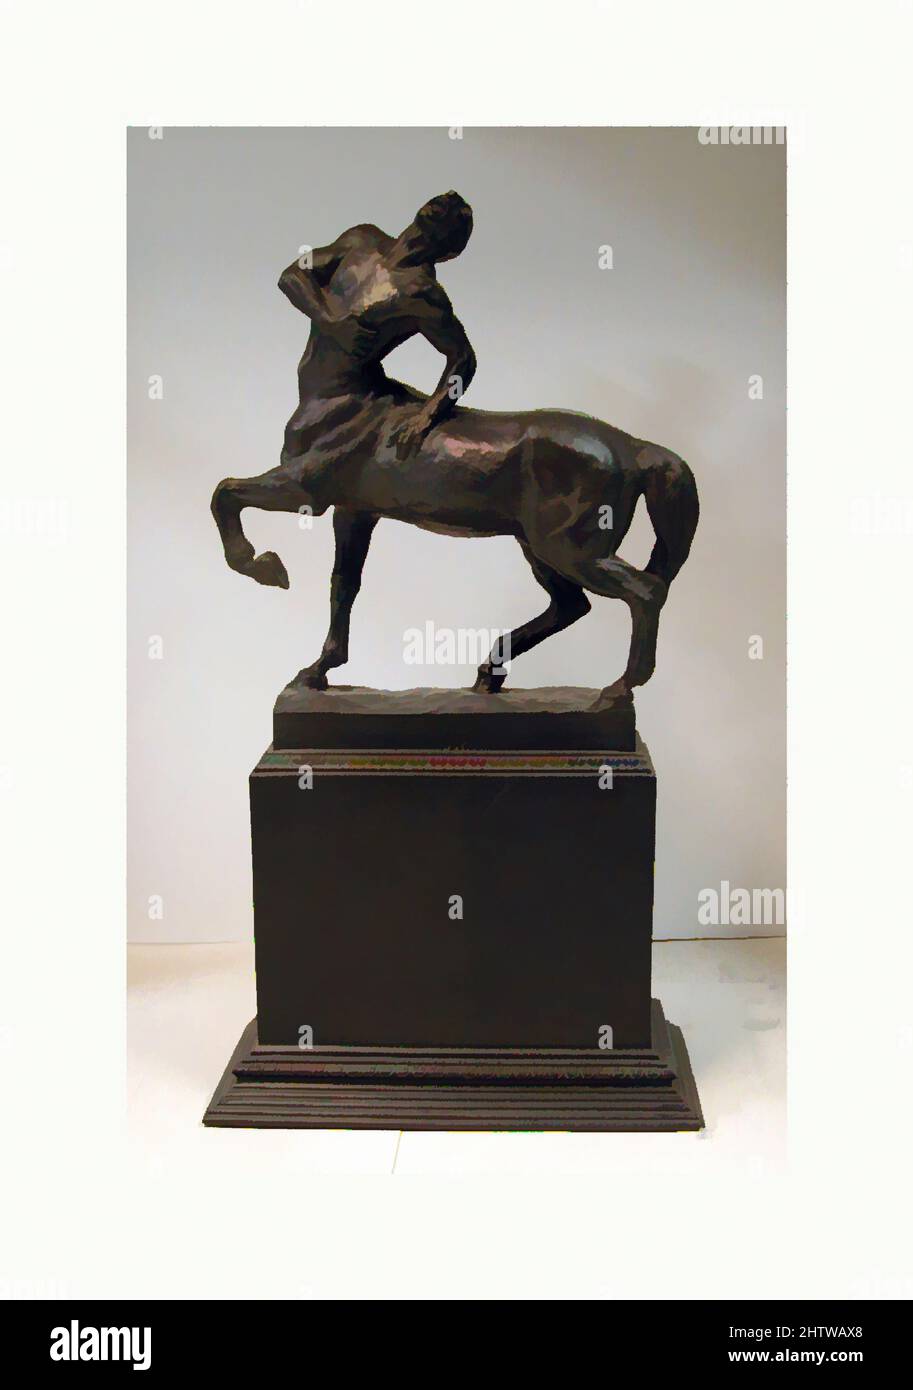 Art inspired by Wounded centaur, 19th century, German, Bronze, Height: 24 3/4 in. (62.9 cm), Sculpture, Franz von Stuck (German, Tettenweis 1863–1928 Munich, Classic works modernized by Artotop with a splash of modernity. Shapes, color and value, eye-catching visual impact on art. Emotions through freedom of artworks in a contemporary way. A timeless message pursuing a wildly creative new direction. Artists turning to the digital medium and creating the Artotop NFT Stock Photo